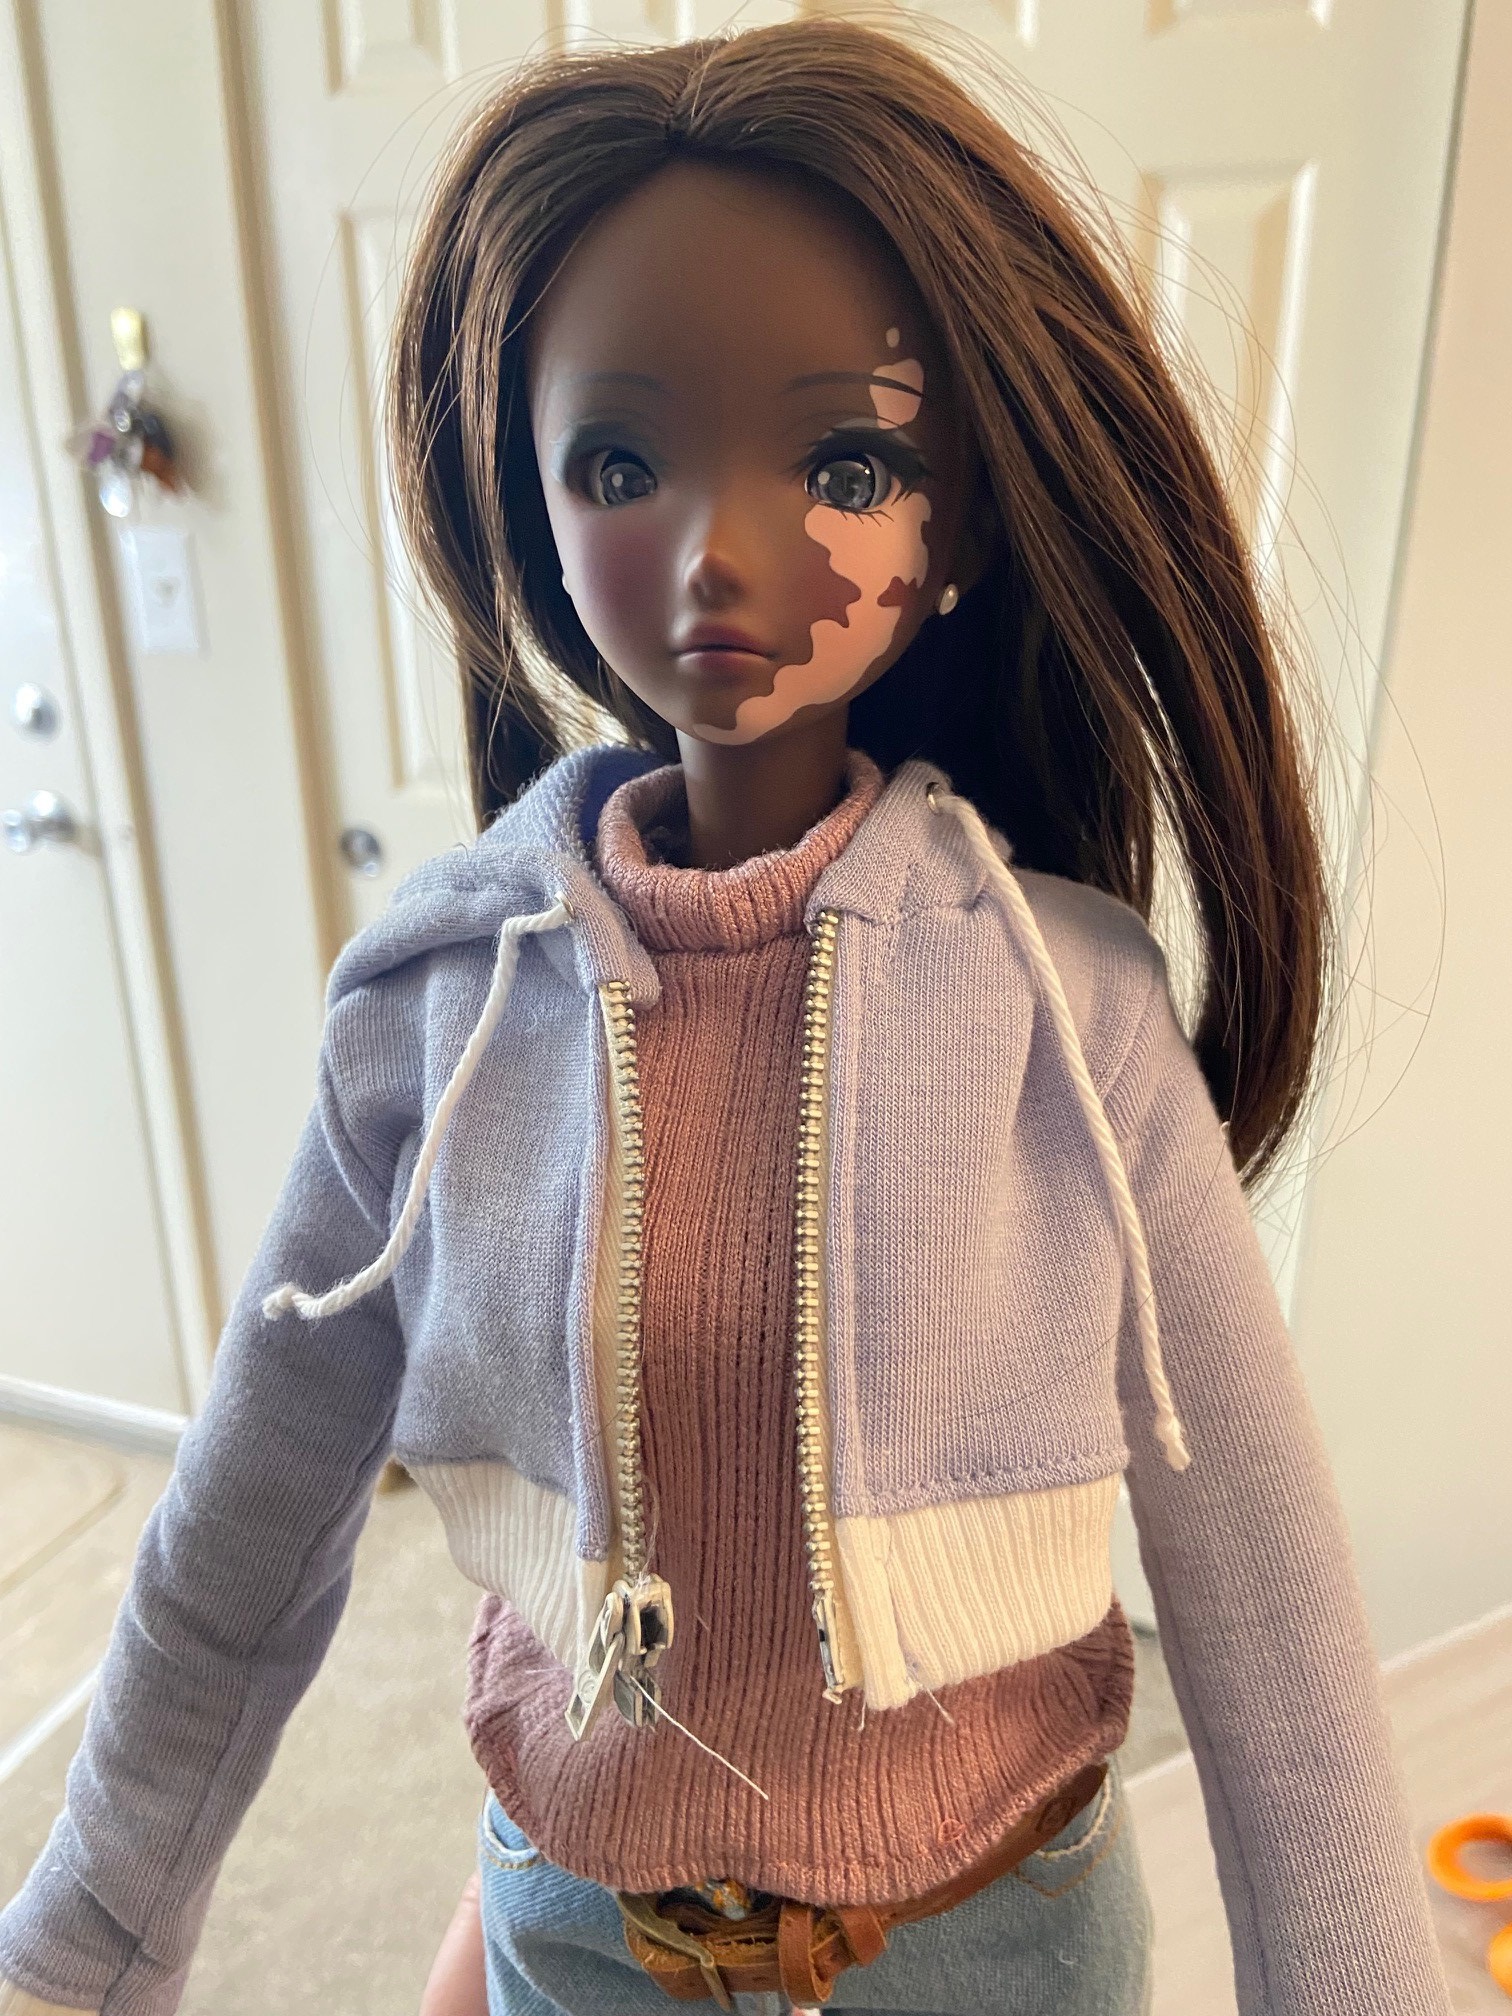 A Smart Doll Liberty in a pink sweater and periwinkle cropped jacket.